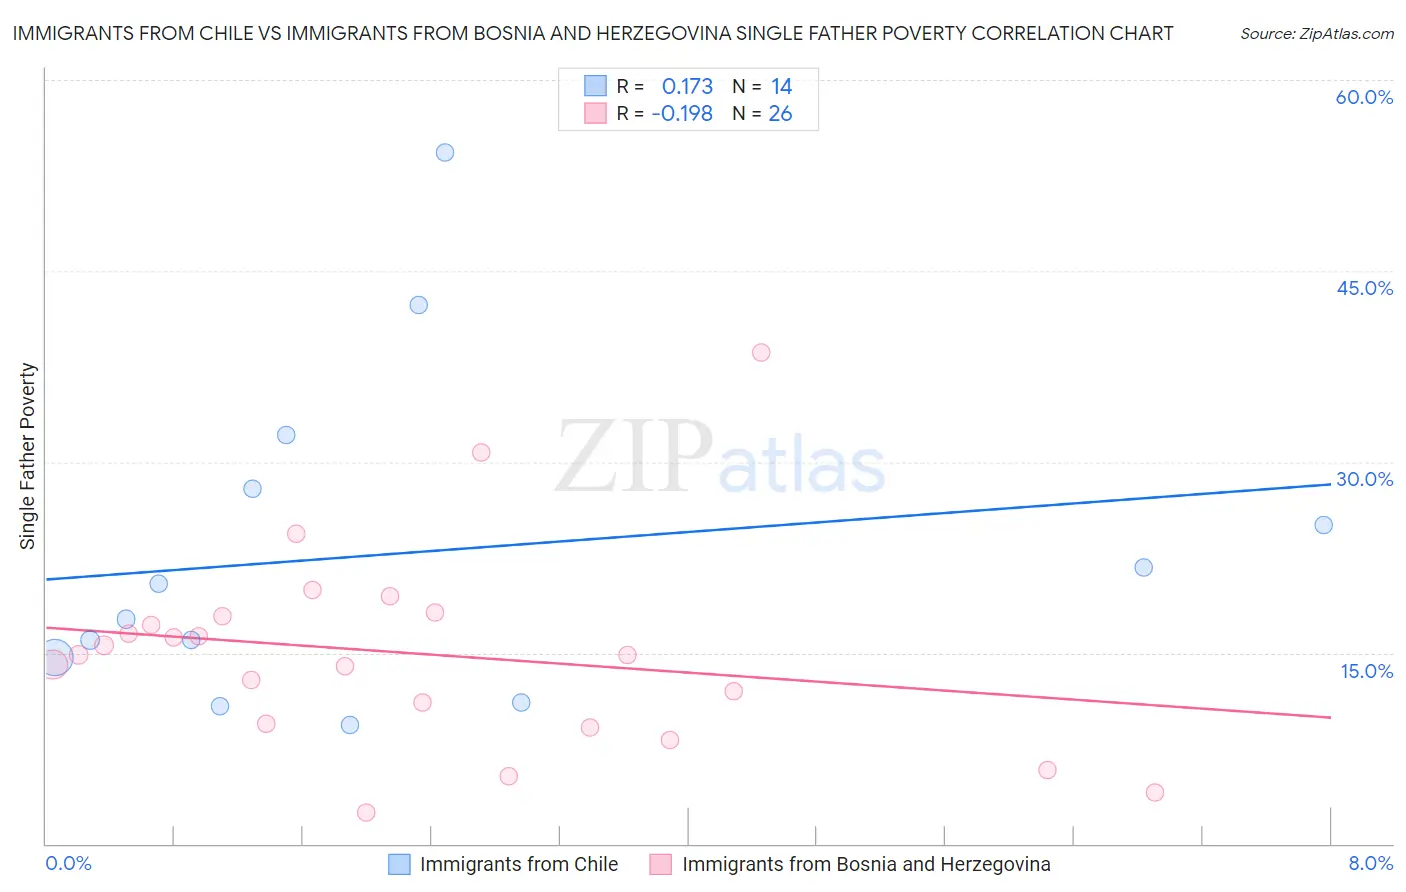 Immigrants from Chile vs Immigrants from Bosnia and Herzegovina Single Father Poverty